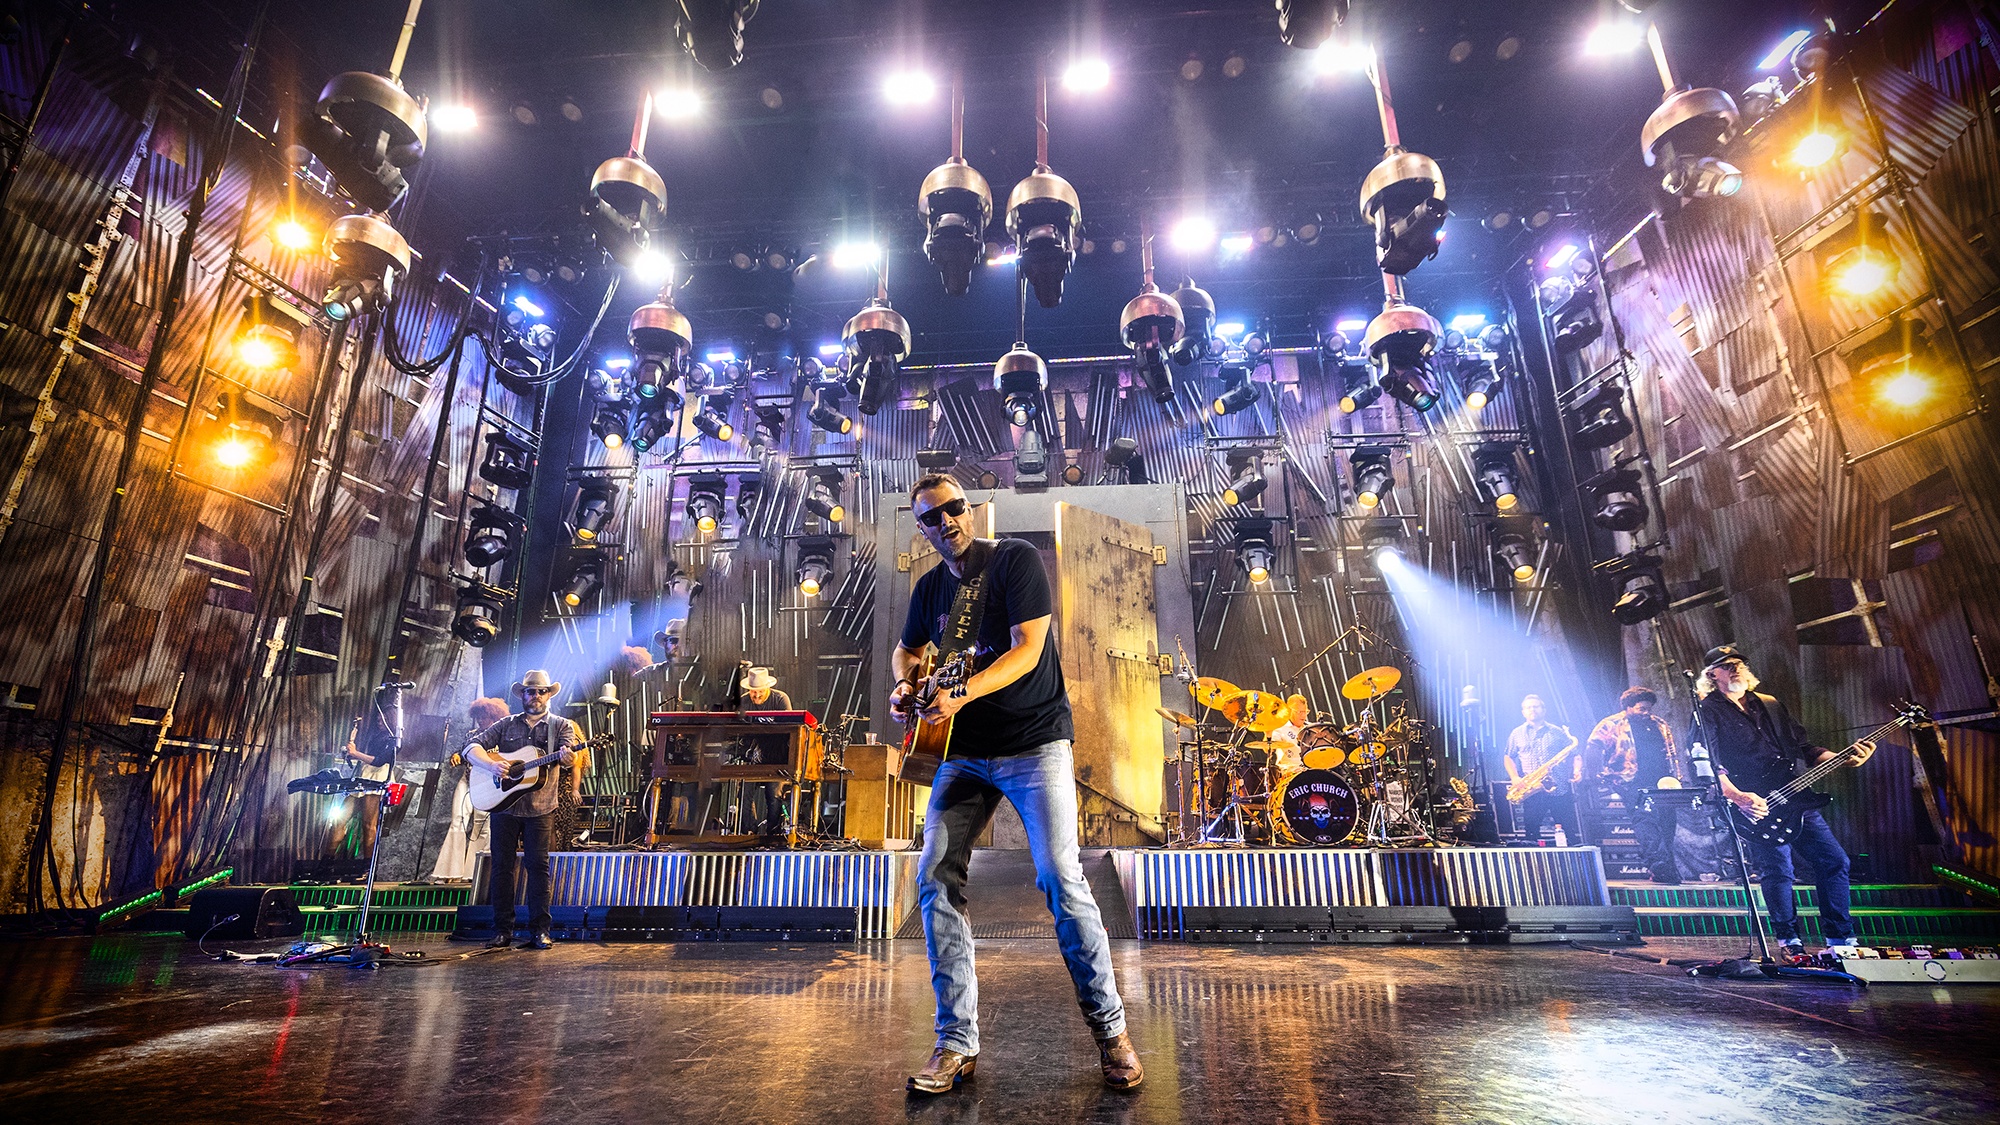 Front view shot of country artist Eric Church performing on stage with band, light show and hanging lights